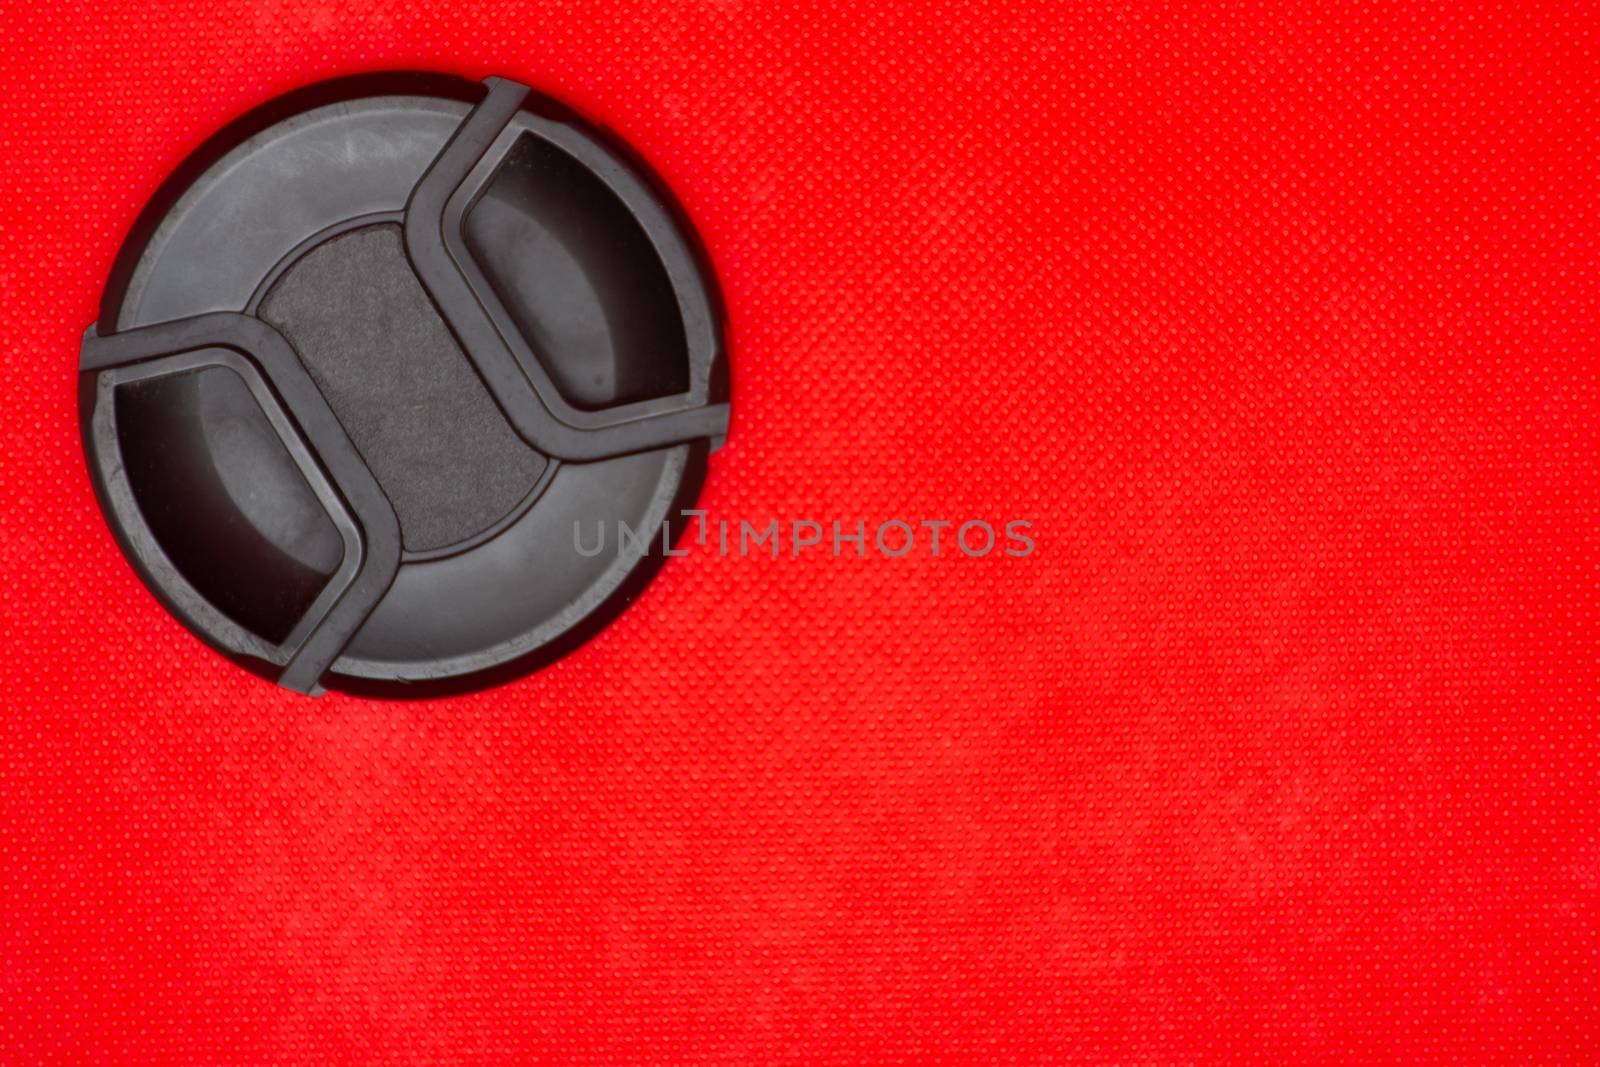 Black circle lens cap for DSLR camera lens on a rich red backgro by kingmaphotos